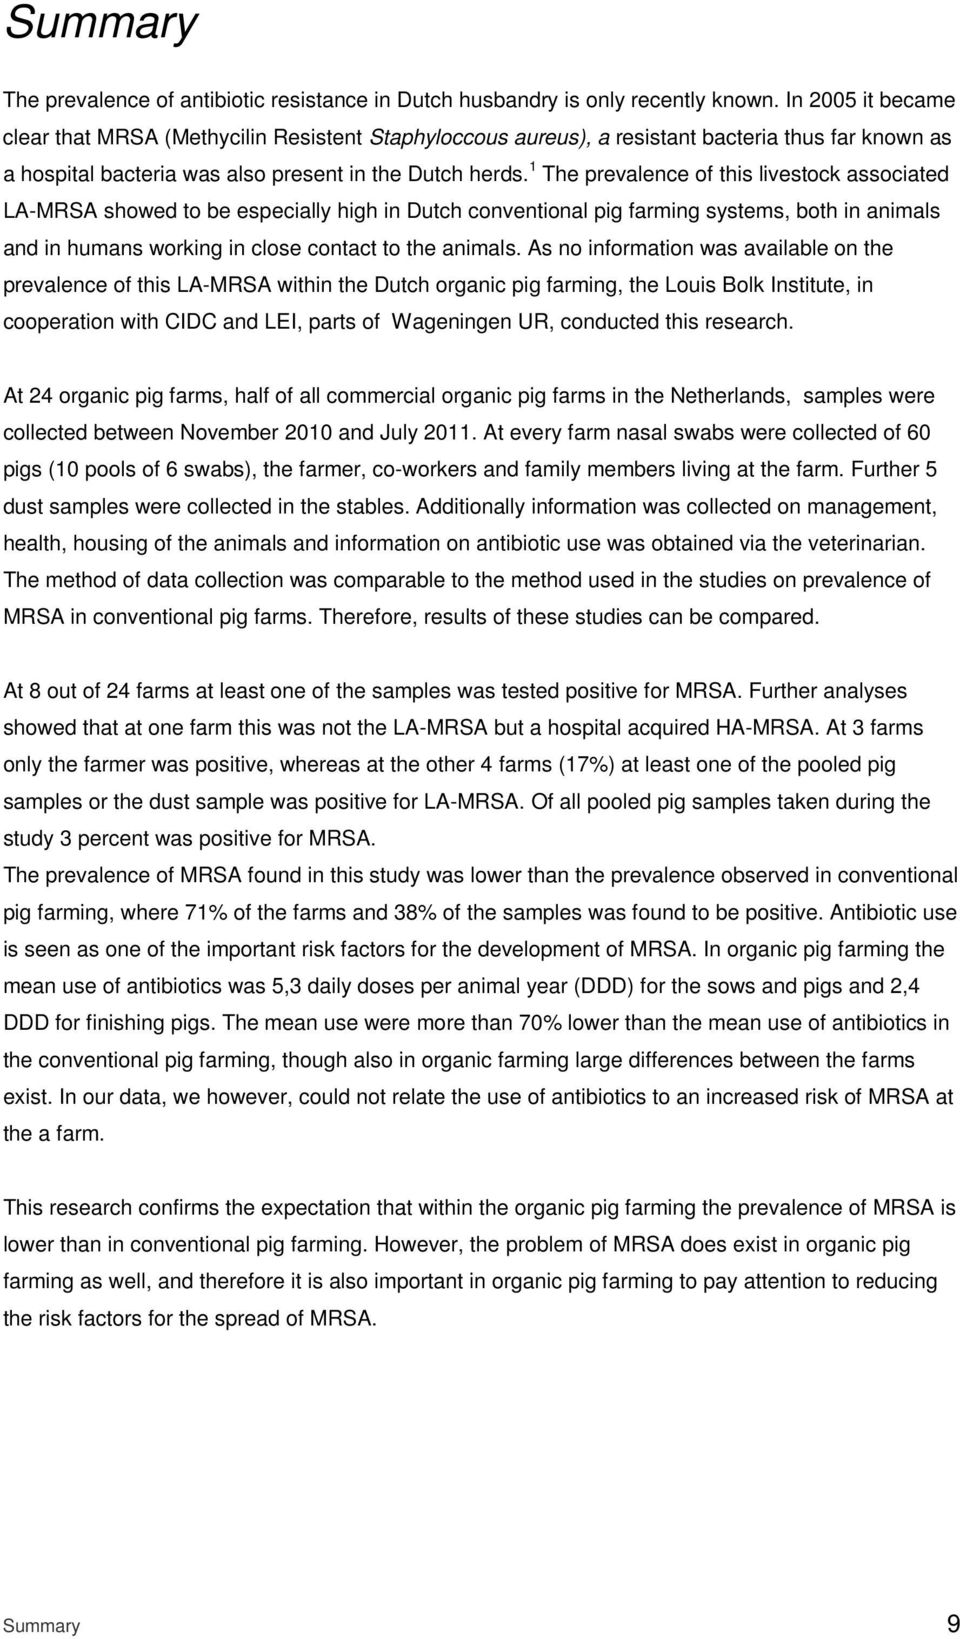 1 The prevalence of this livestock associated LA-MRSA showed to be especially high in Dutch conventional pig farming systems, both in animals and in humans working in close contact to the animals.